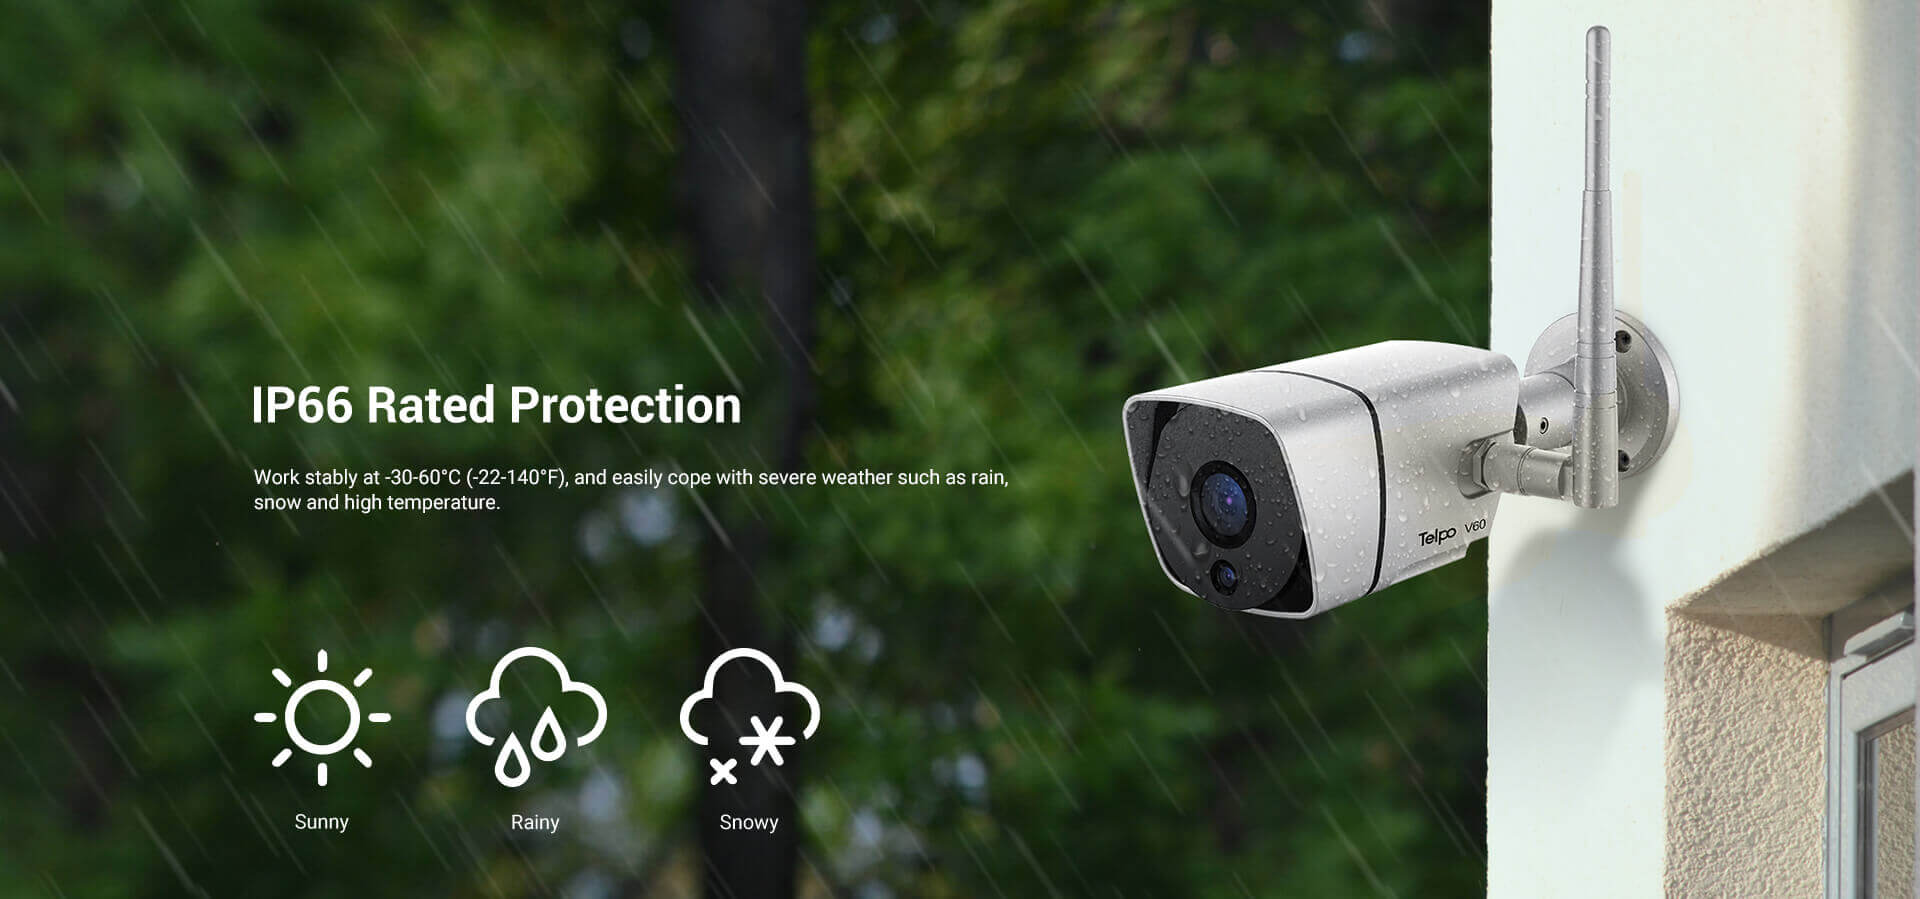 IP66 Rated Protection Network camera for rain, snow, high temperature